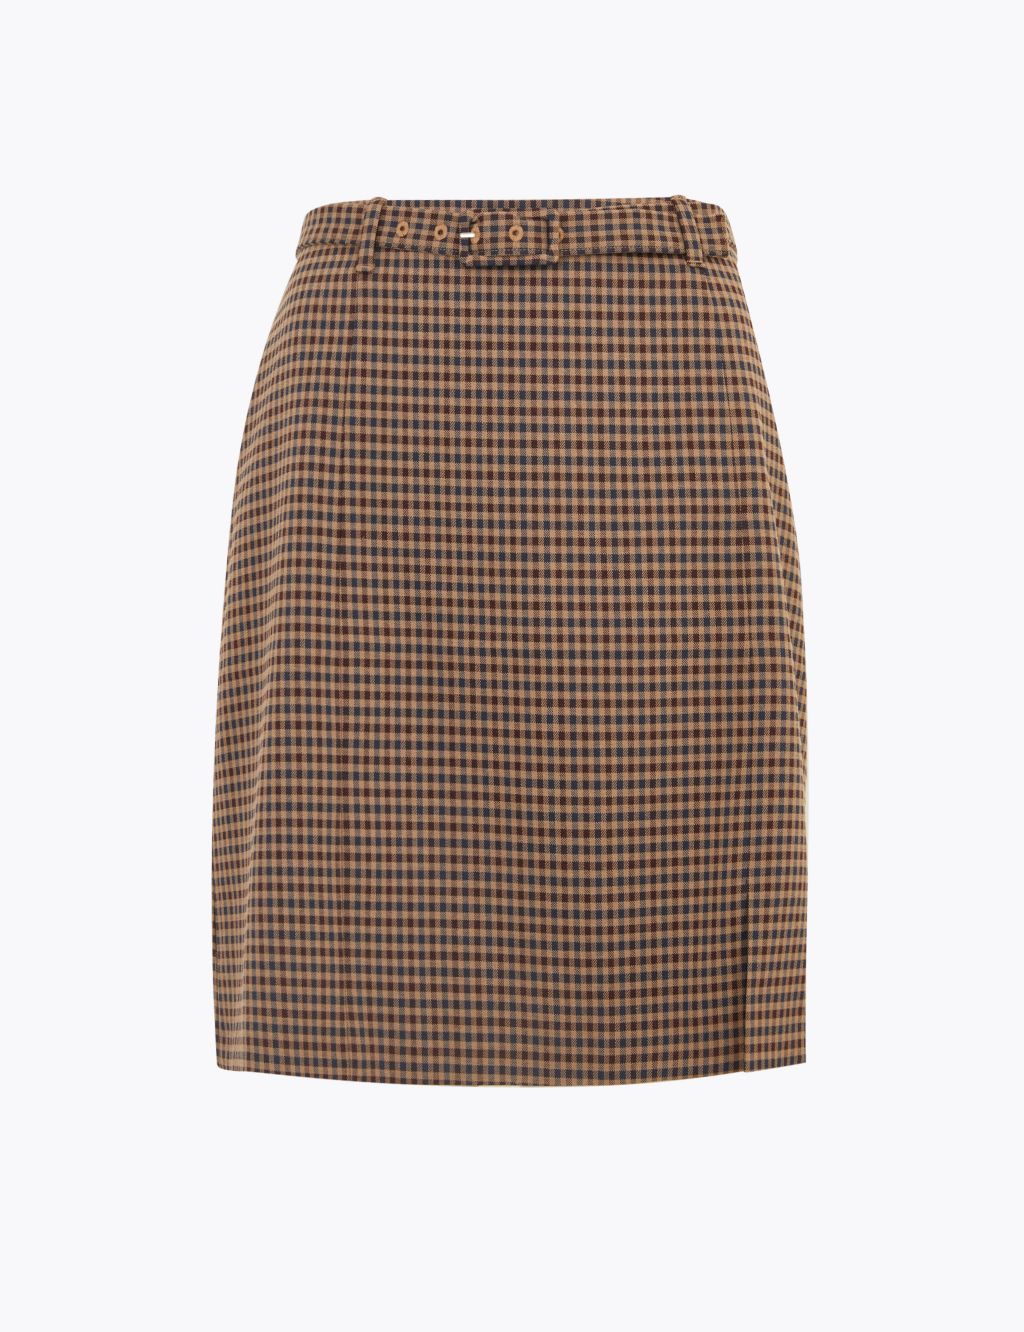 Checked Belted Mini A-Line Skirt | M&S Collection | M&S